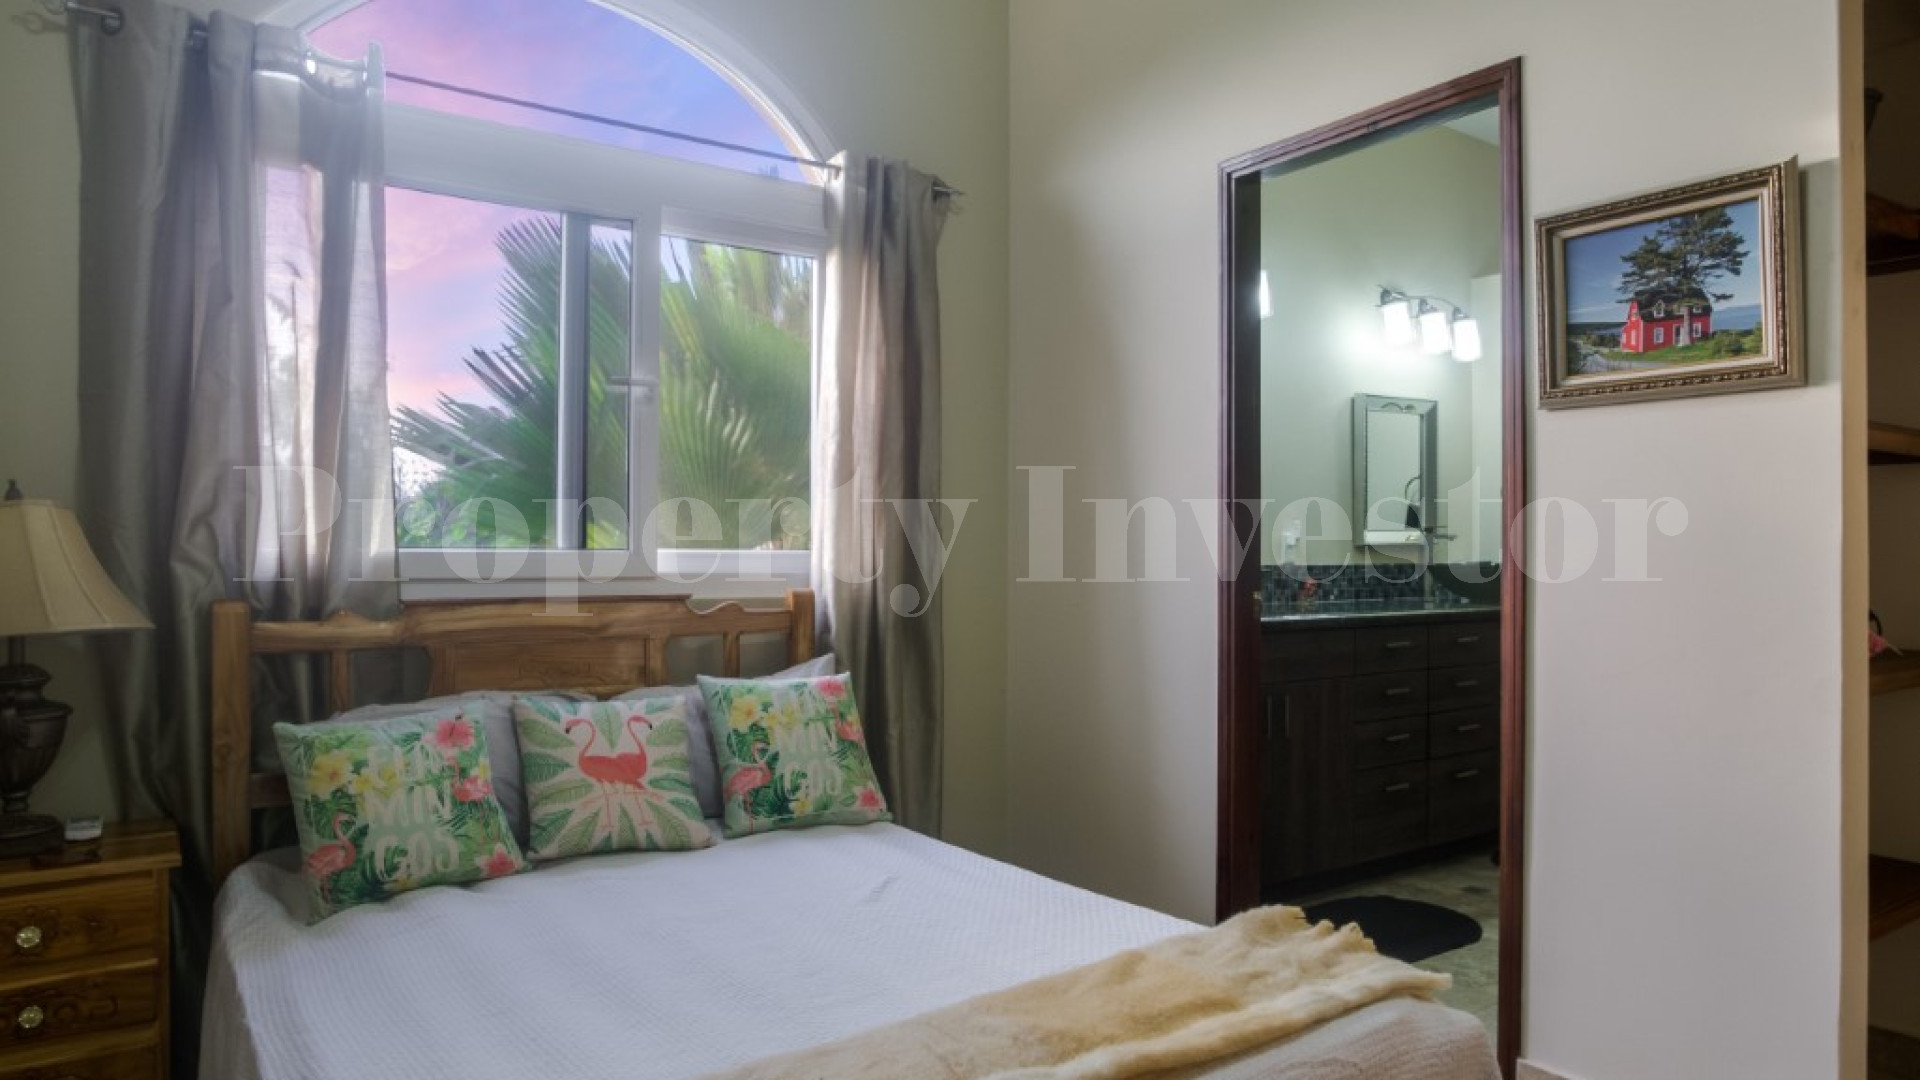 Dazzling 3 Bedroom Oceanview Gated Community Home for Sale in Pedasi, Panama